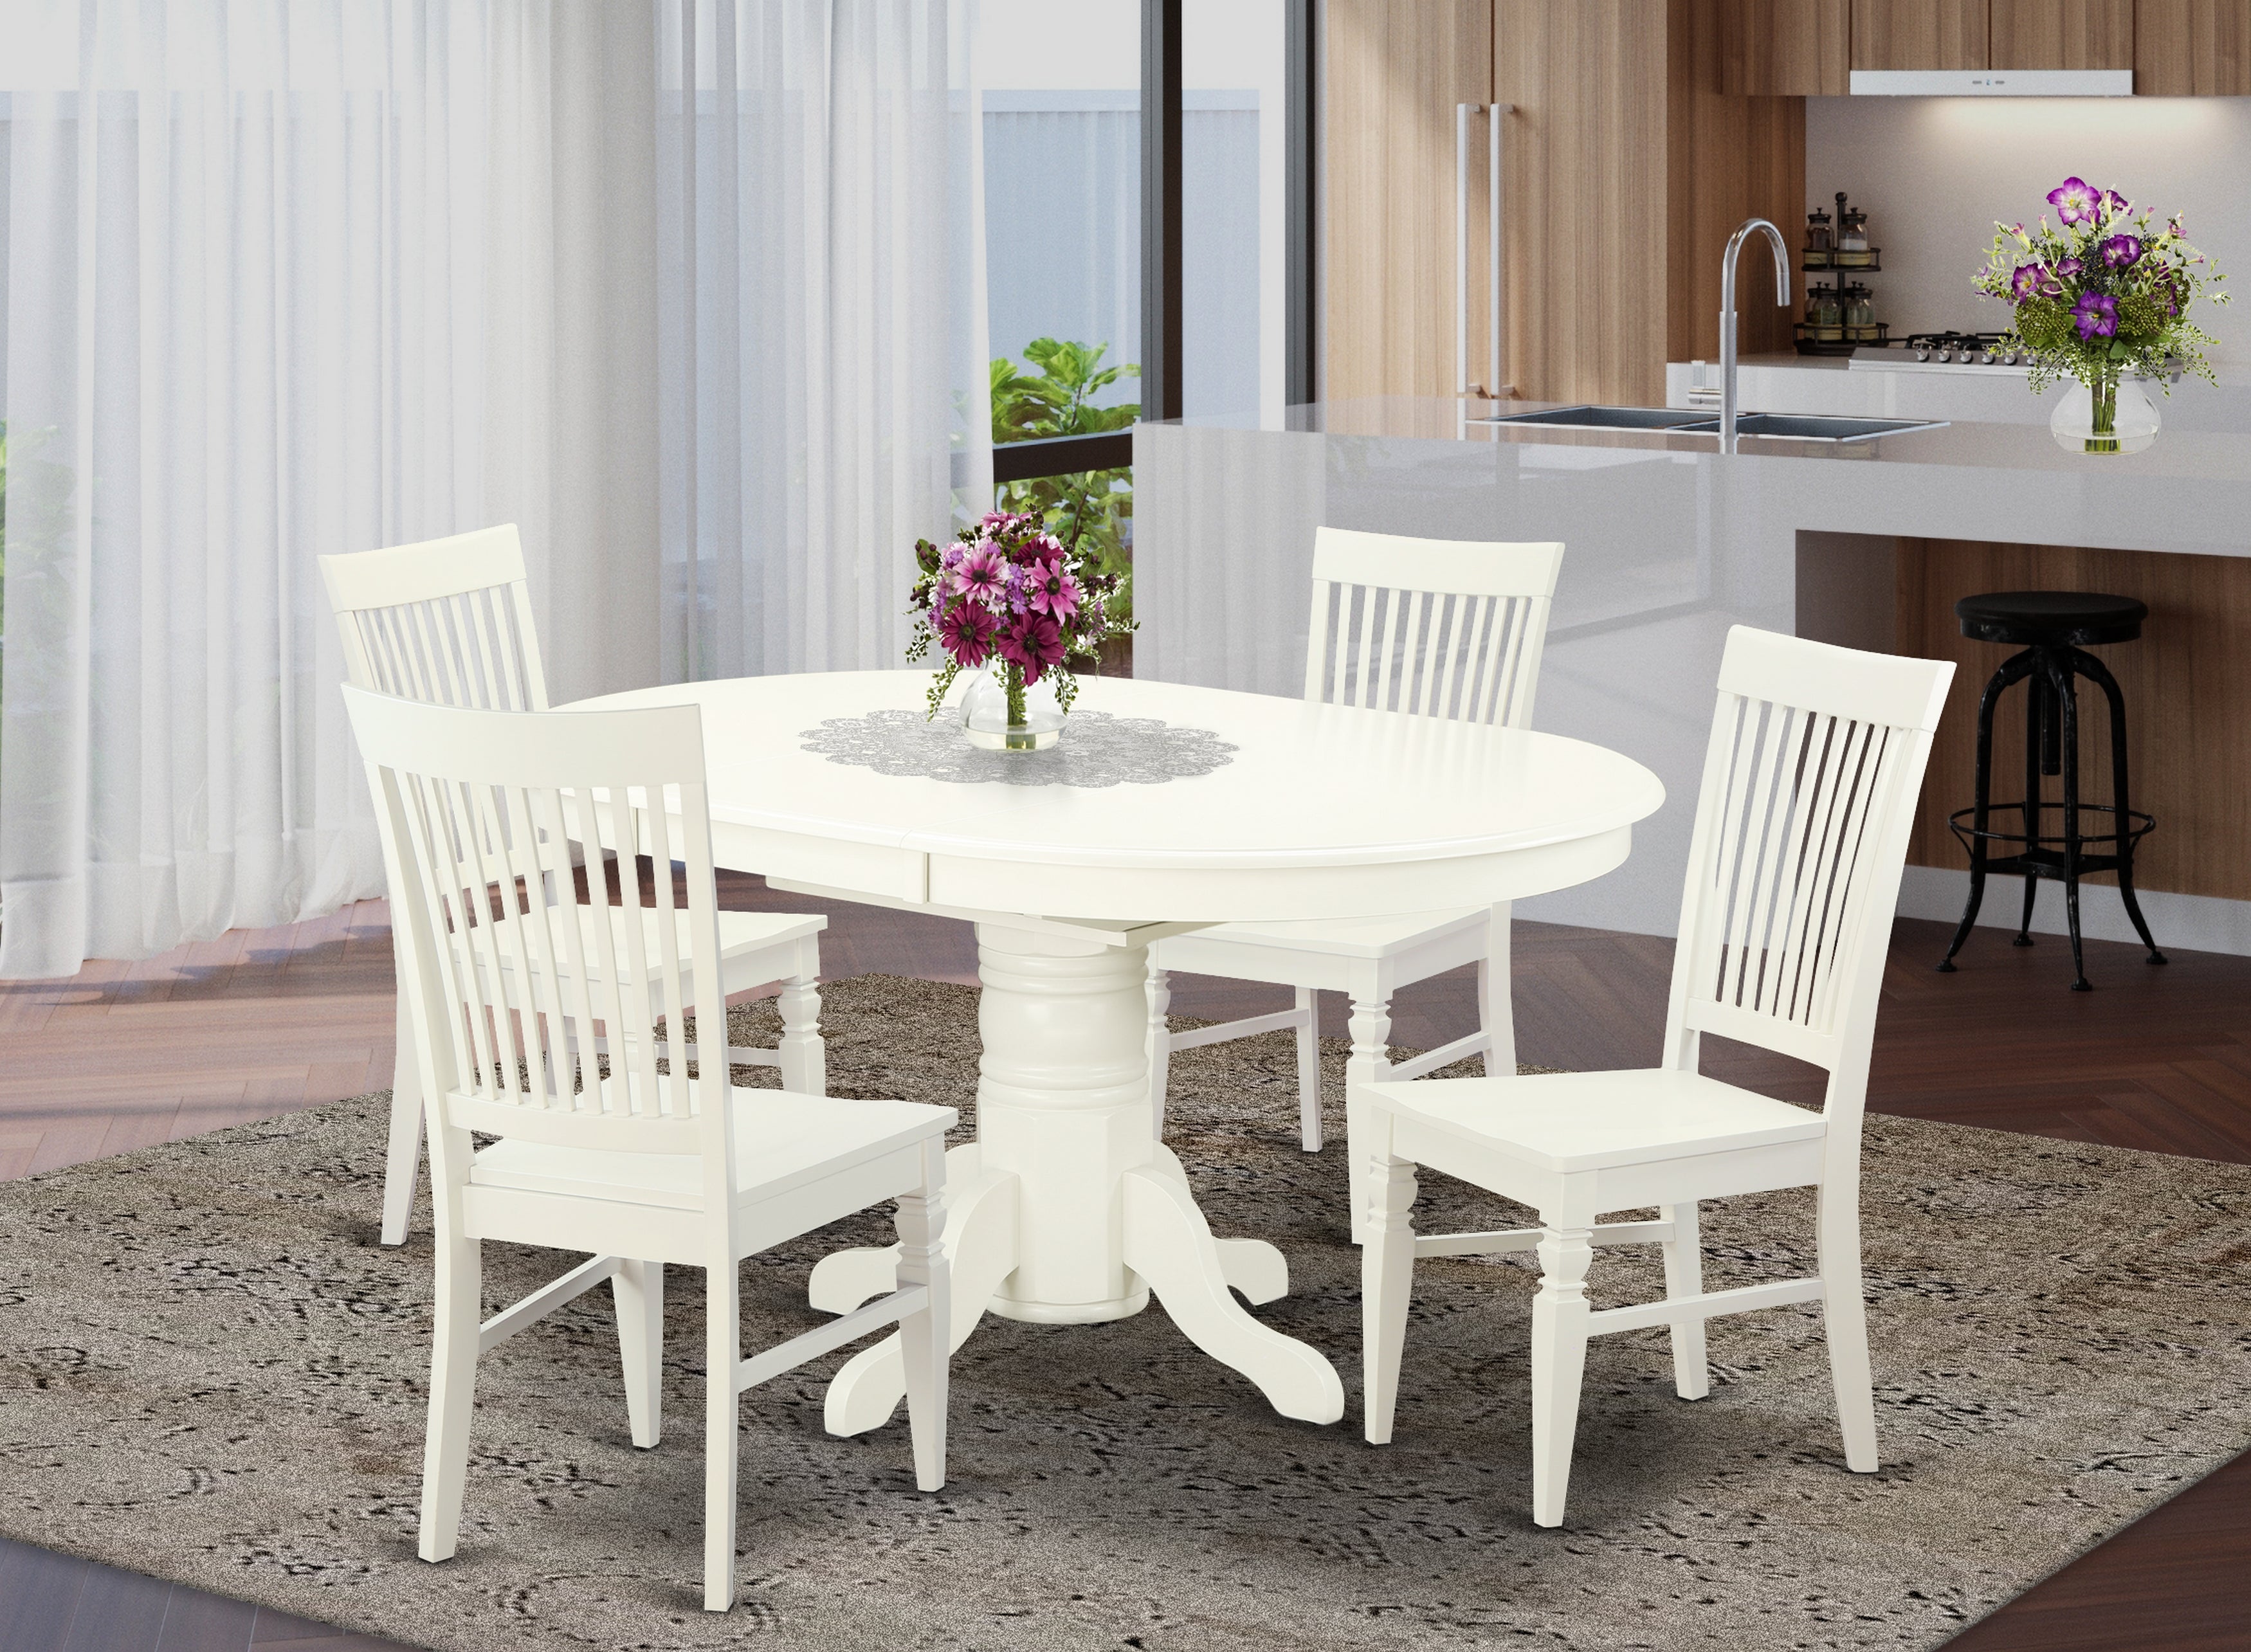 AVWE5-LWH-W 5 Pc Dining set with a Kitchen Table and 4 Wood Seat Kitchen Chairs in Linen White